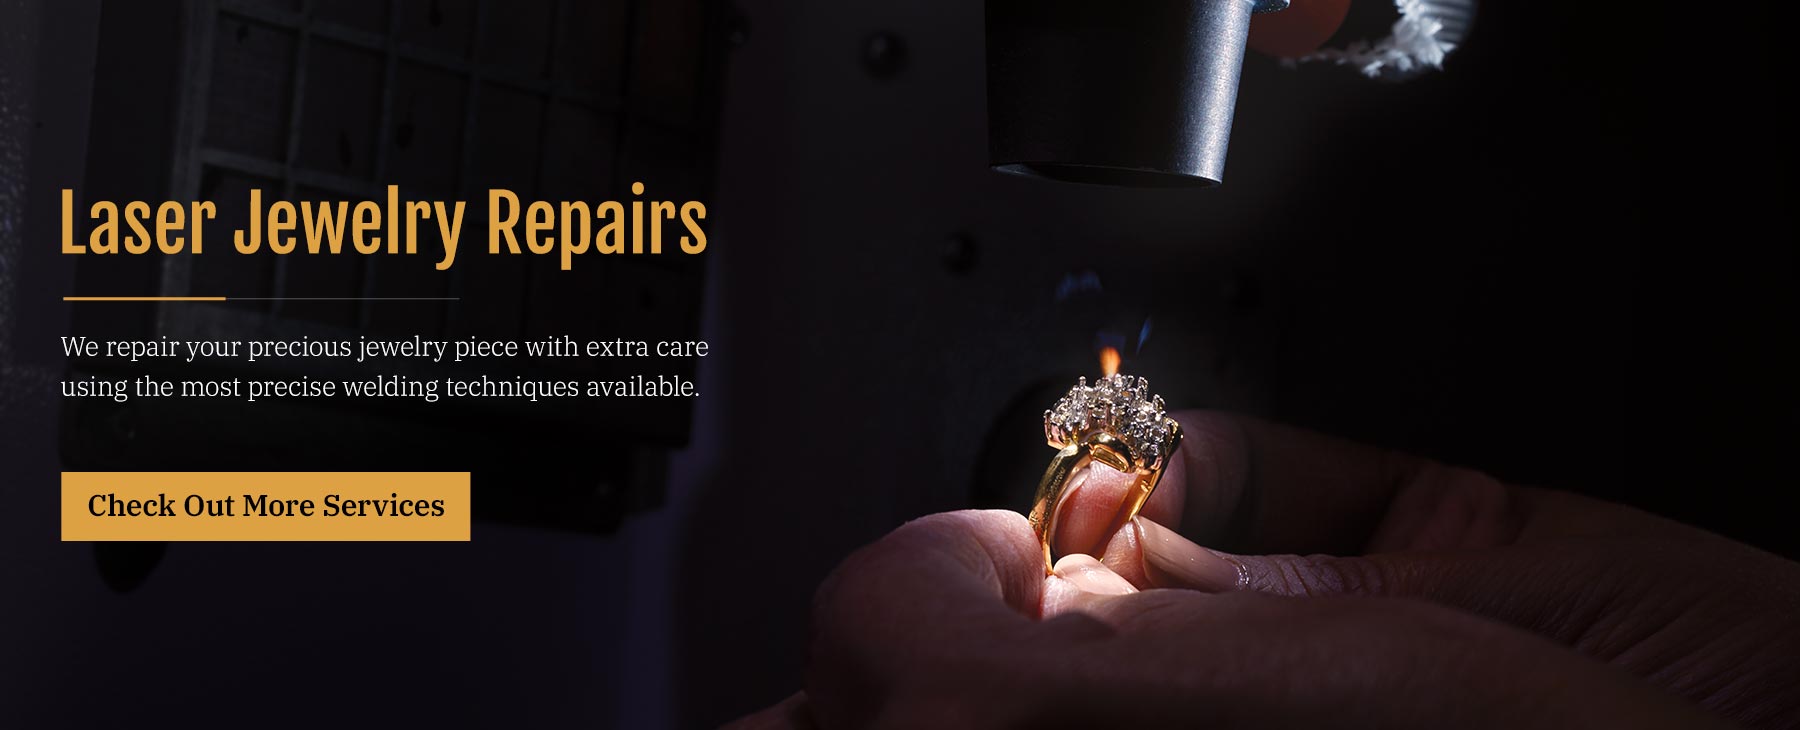 Laser Jewelry Repair In Warrington, PA At Henry's Jewelers